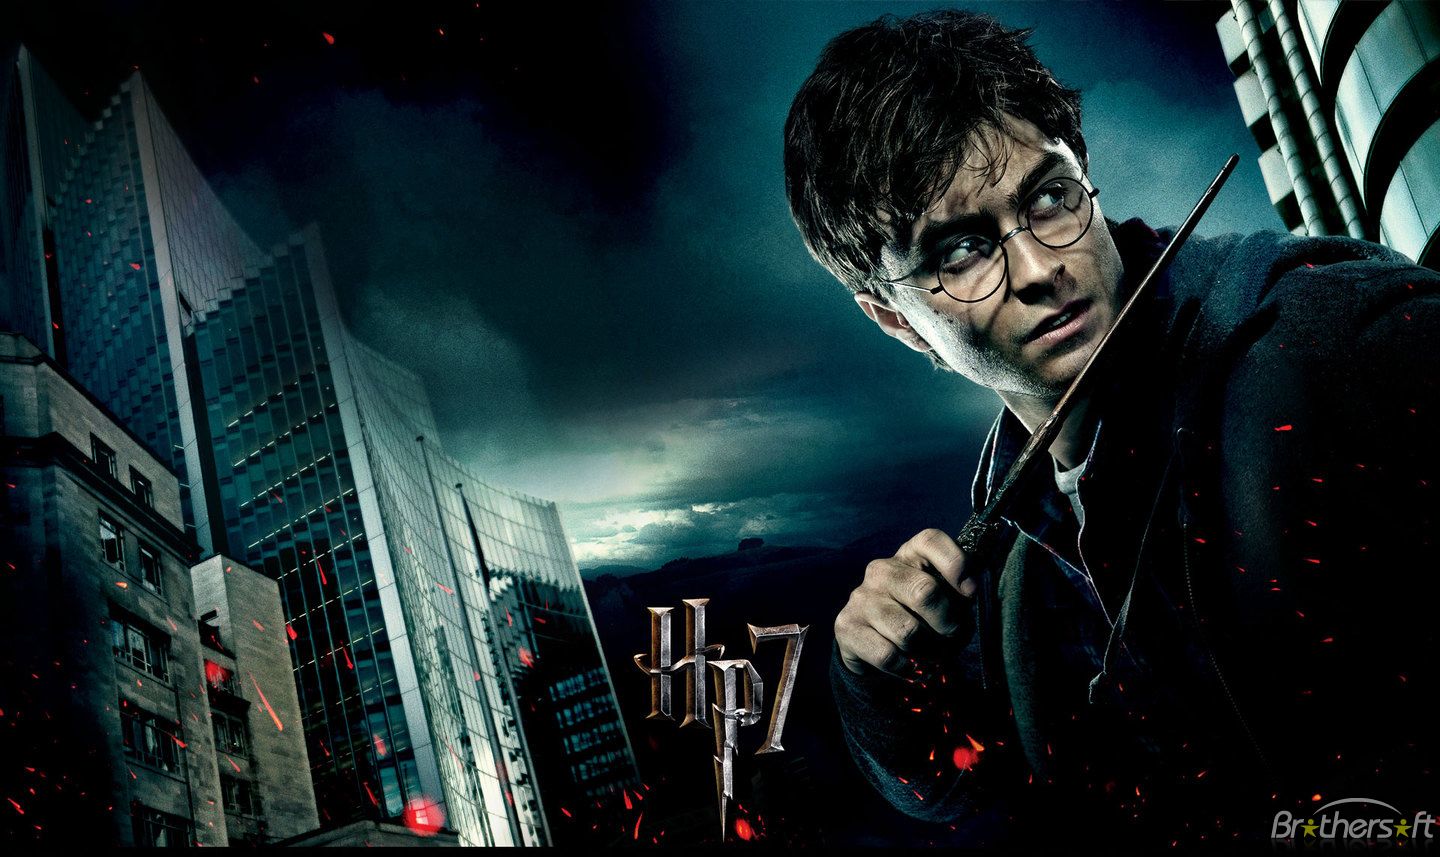 If 'Harry Potter' took place in 2019, here's what Hogwarts would